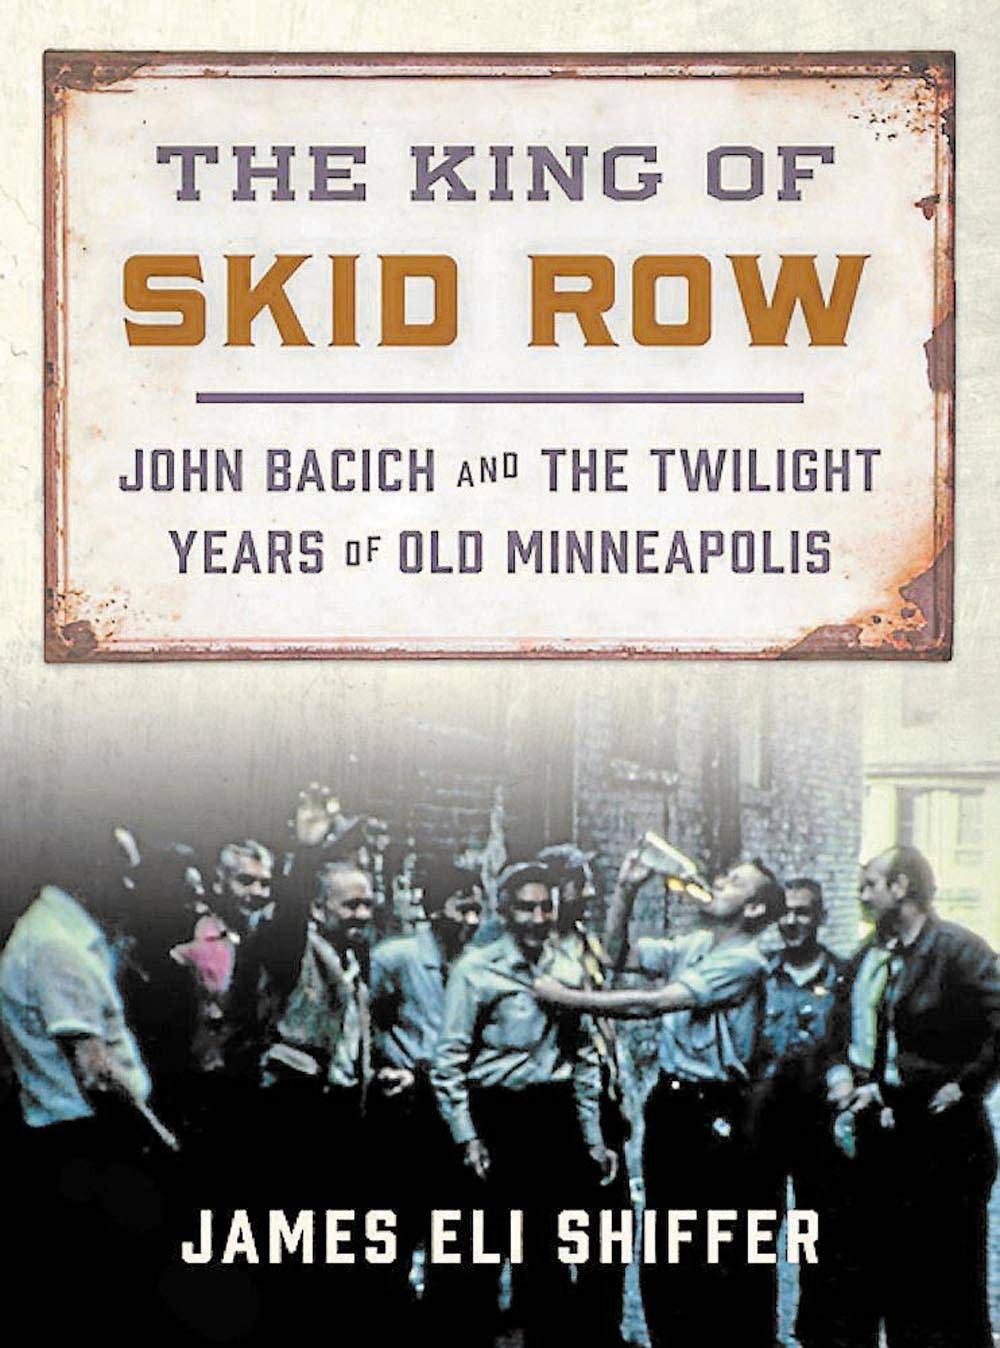 The cover of James Shiffer's book, "The King of Skid Row: John Bacich and the Twilight Years of Old Minneapolis."